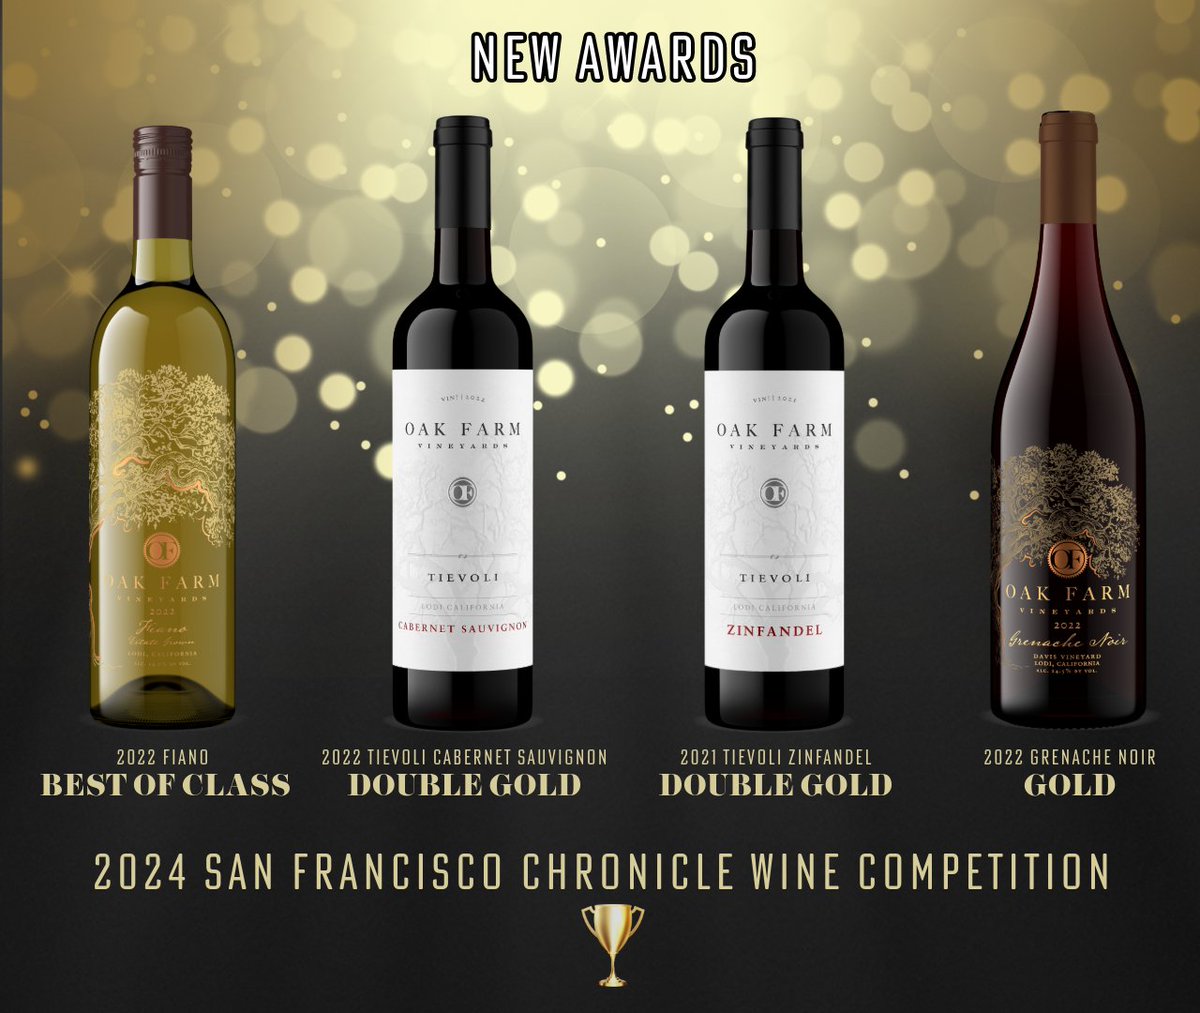 Always honored to receive new awards! Thank you San Francisco Wine Competition for these awards! All available in our tasting room currently or on our website.